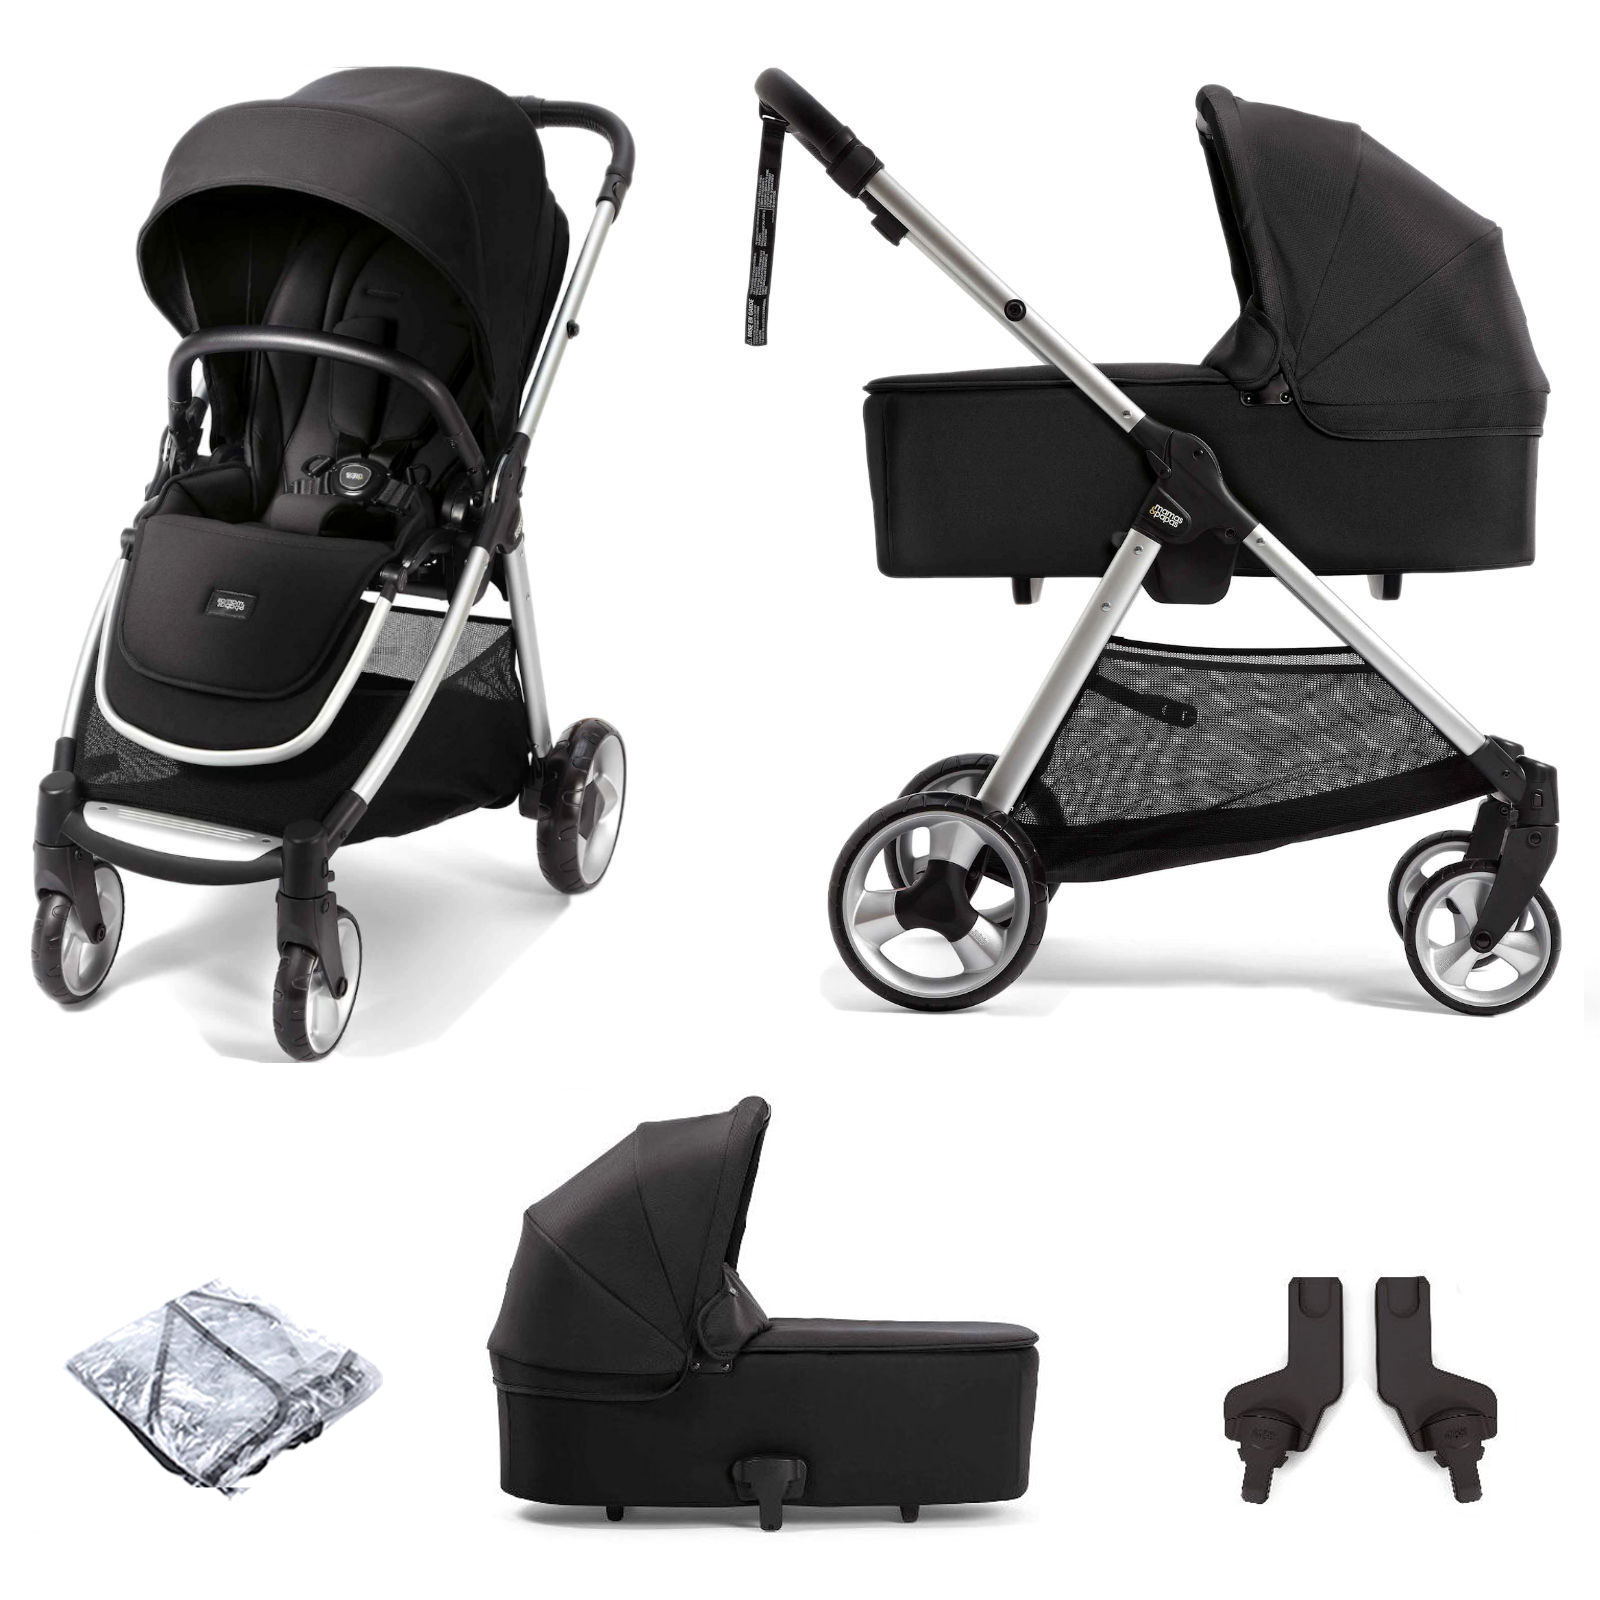 Mamas & Papas Flip XT2 2in1 Pushchair Stroller with Carrycot - Black